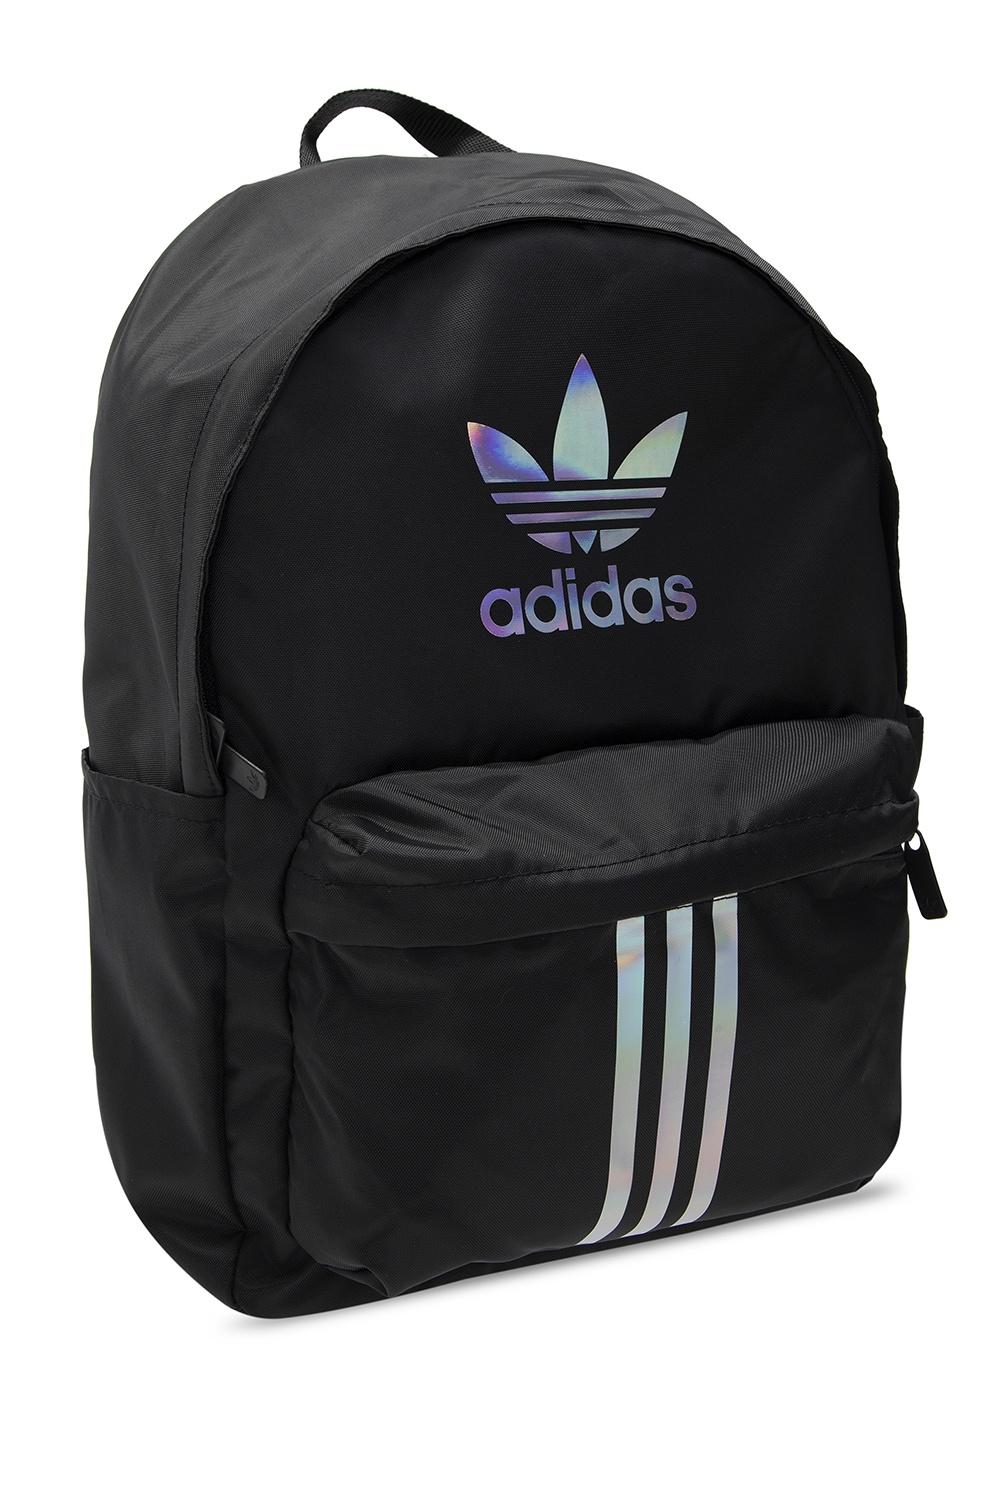 adidas Originals Backpack With Holographic Print Black | Lyst